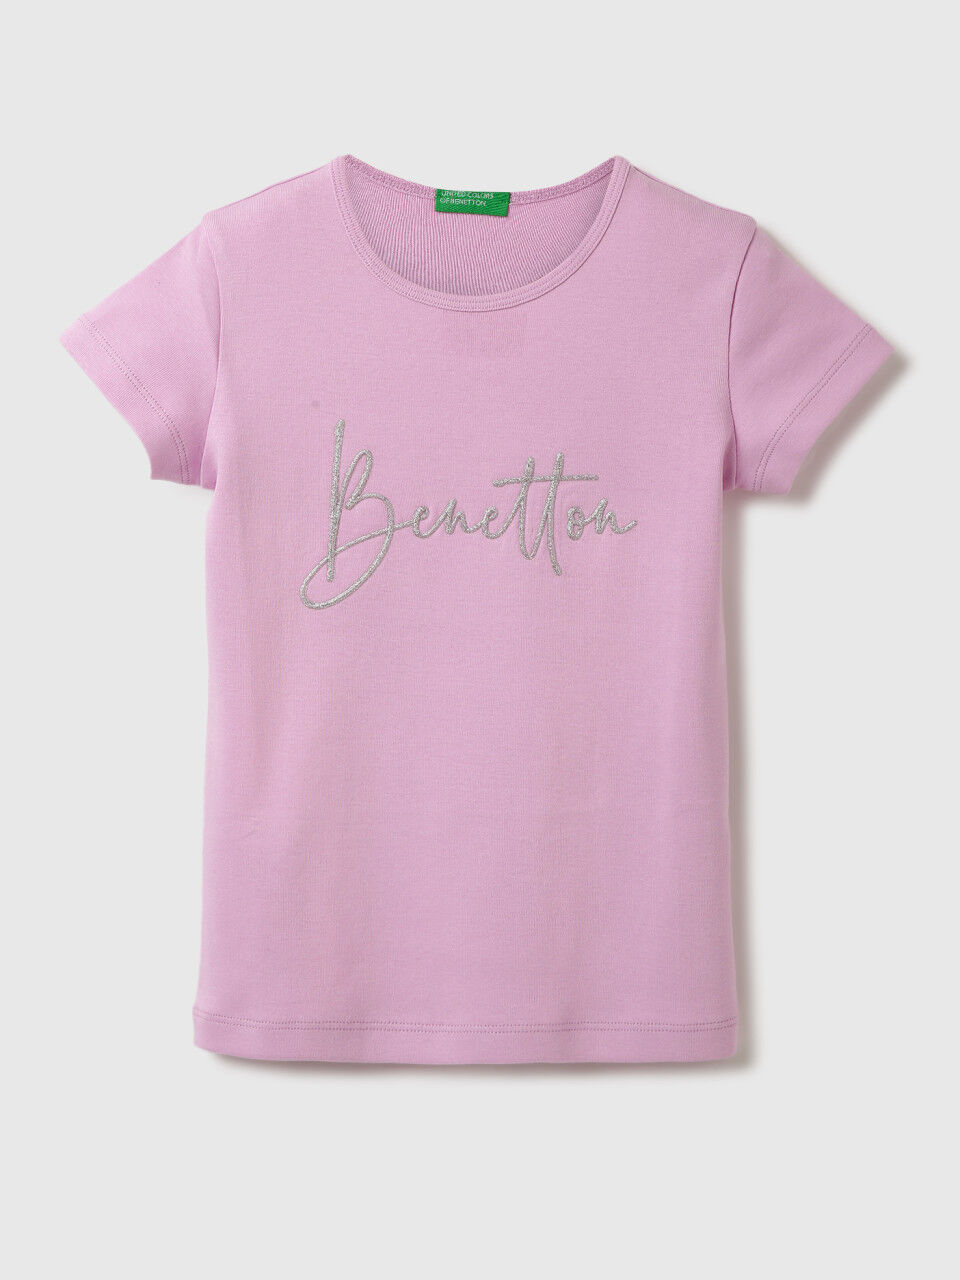 United Colors of Benetton Girls Glitted Round Neck Top